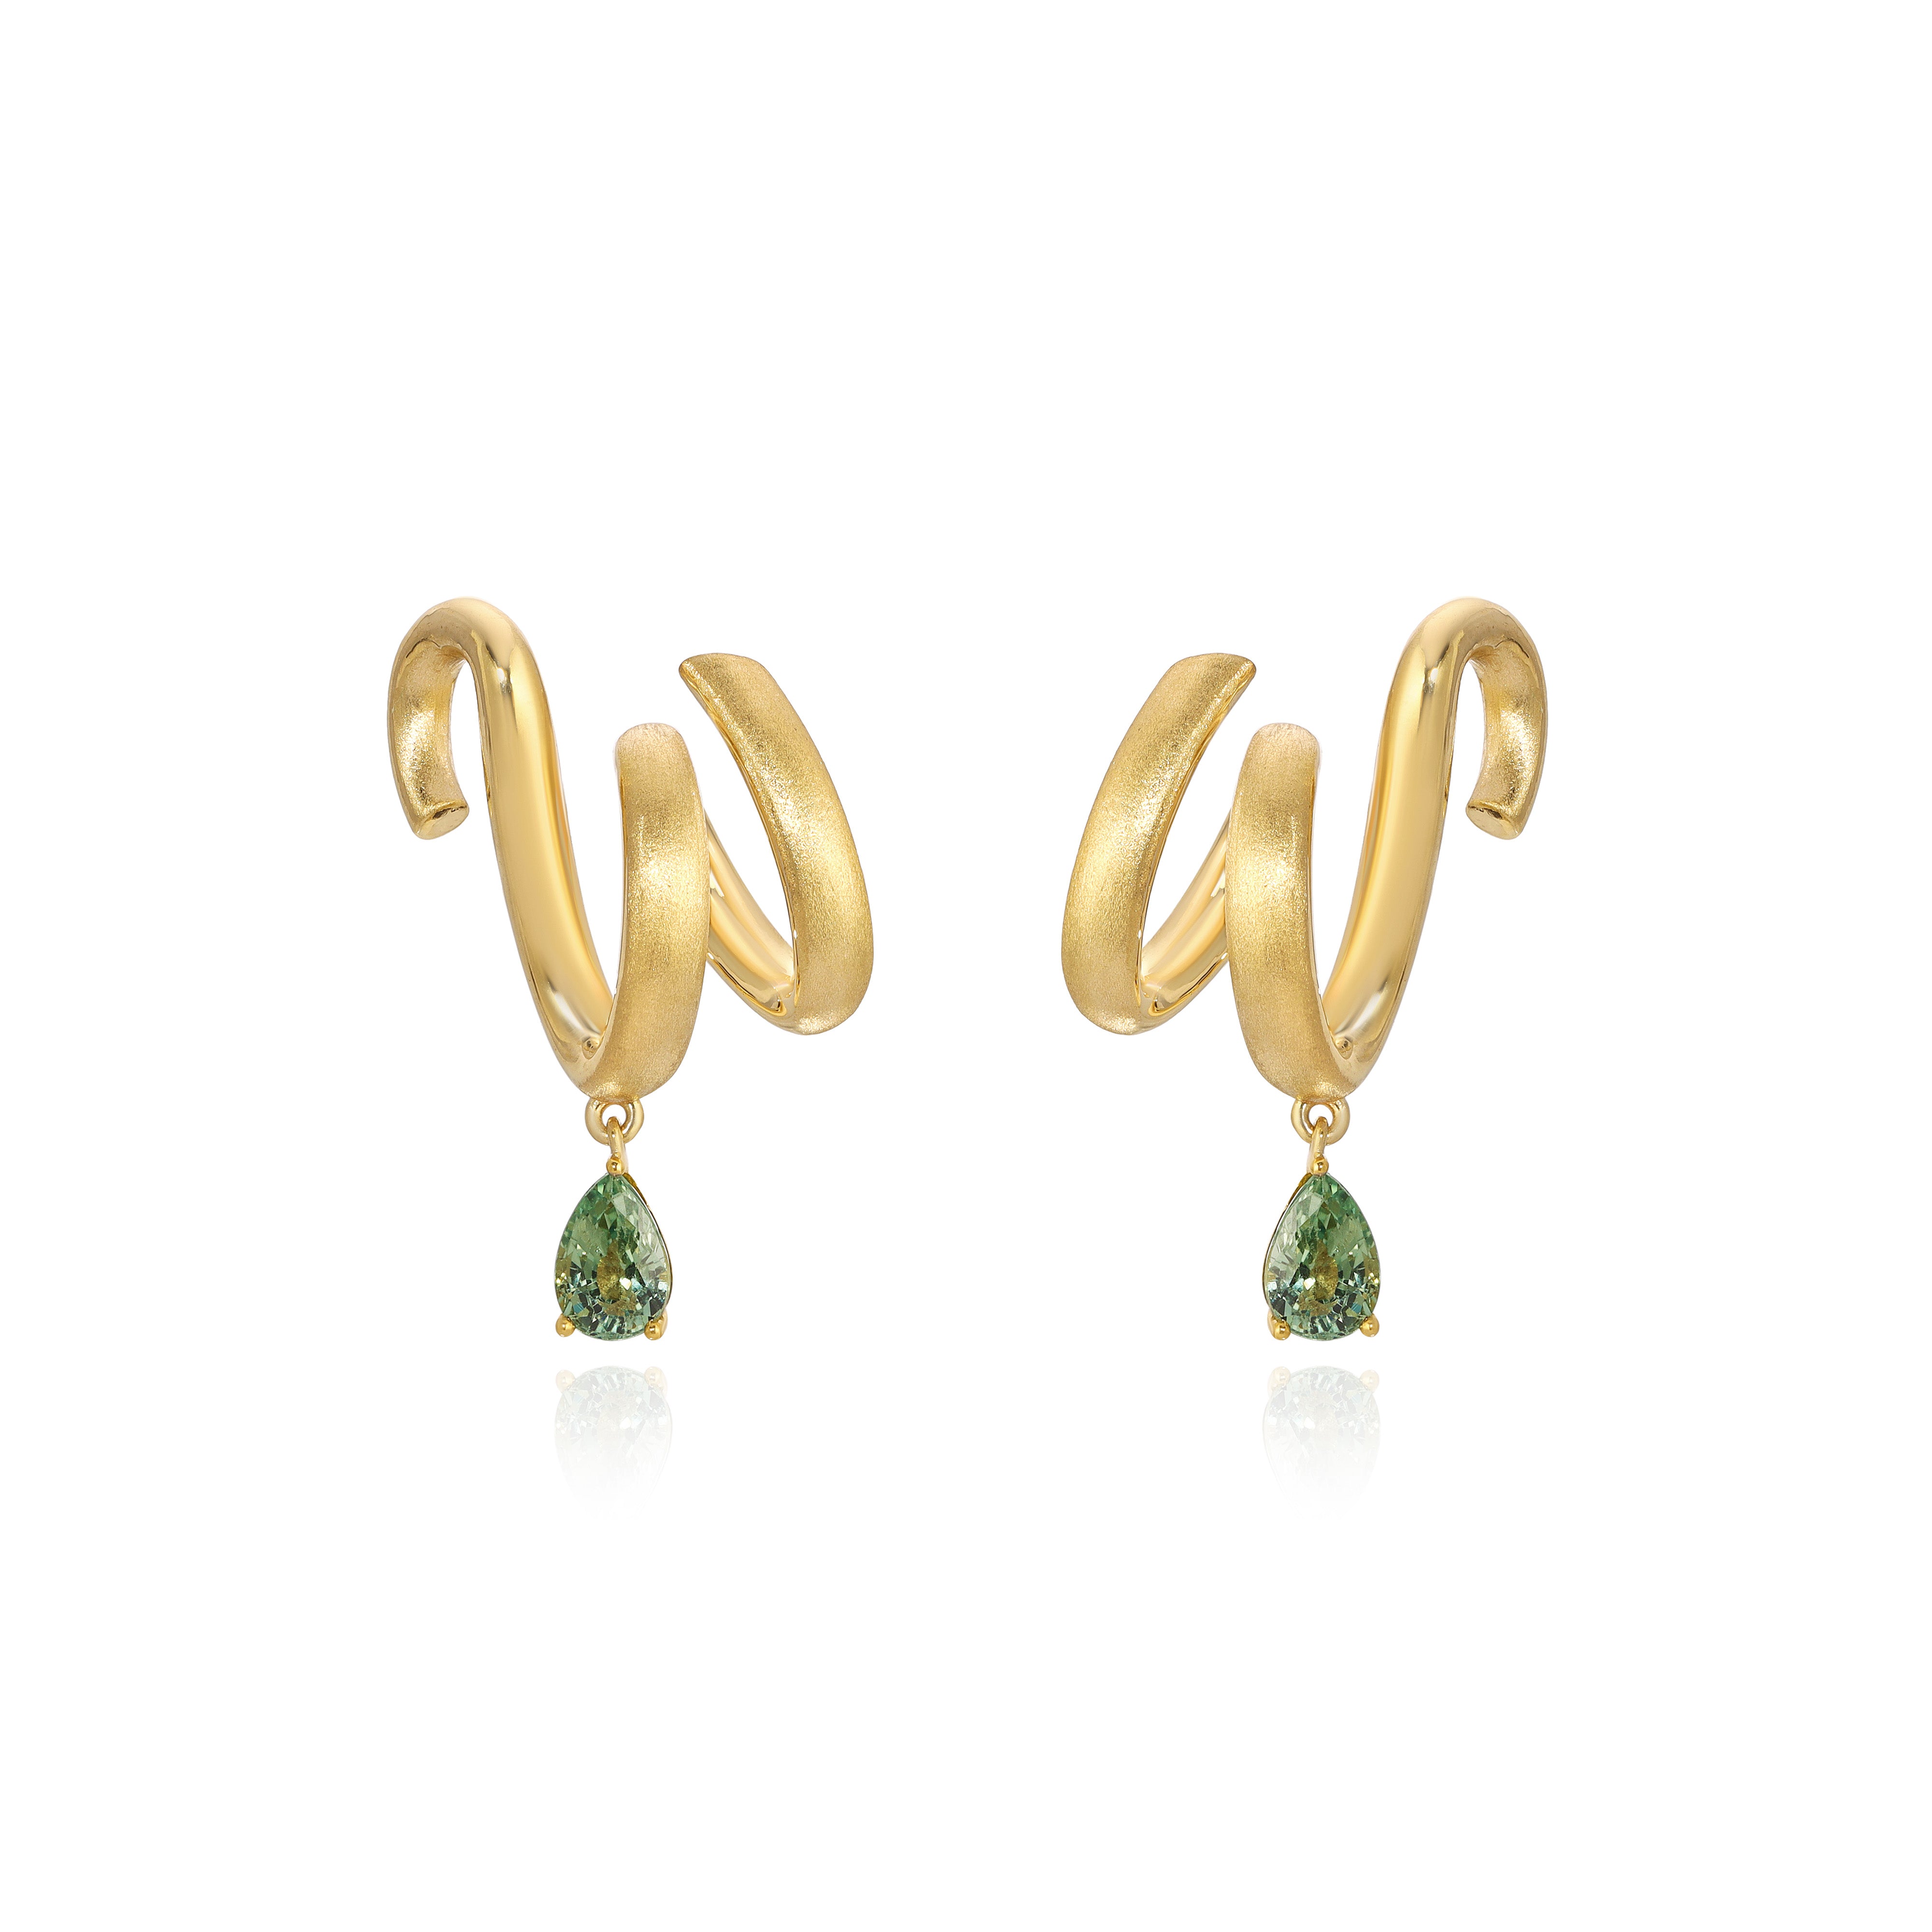 Yellow Gold ribbon shaped Earrings with a pear shaped Green Sapphire, Medium